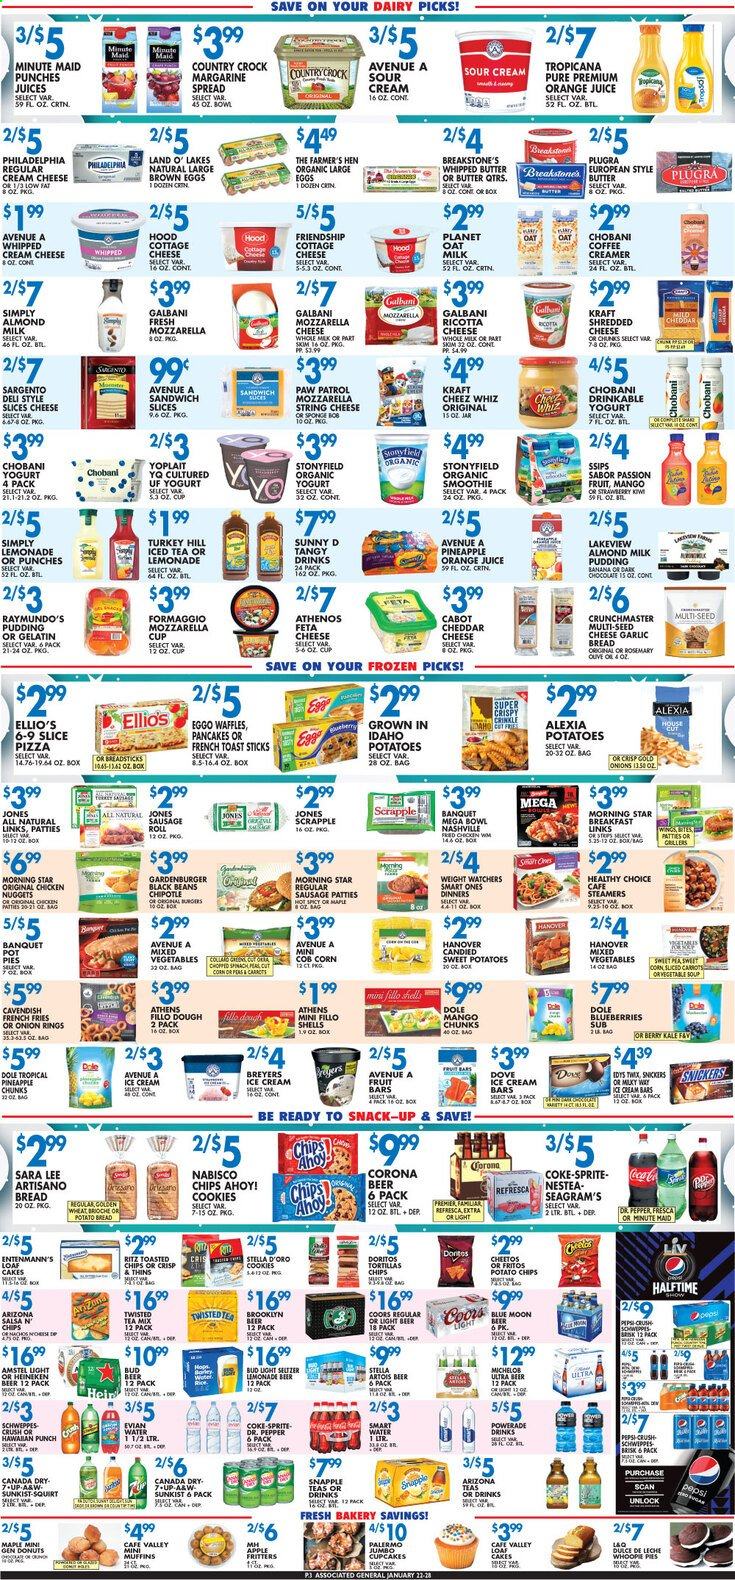 thumbnail - Associated Supermarkets Flyer - 01/22/2021 - 01/28/2021 - Sales products - Coors, Blue Moon, Twisted Tea, Michelob, sweet potato, Dole, blueberries, bread, bread sticks, sausage rolls, tortillas, toast bread, brioche, Sara Lee, cupcake, cake, donut, pancakes, muffin, waffles, Entenmann's, cream cheese, pizza, onion rings, sandwich, soup, nuggets, chicken nuggets, Healthy Choice, Kraft®, sausage, cottage cheese, mild cheddar, mozzarella, ricotta, sandwich slices, shredded cheese, string cheese, Philadelphia, feta, Galbani, Sargento, pudding, yoghurt, Yoplait, Chobani, almond milk, oat milk, large eggs, margarine, whipped butter, sour cream, whipped cream, creamer, salsa, ice cream, ice cream bars, beans, corn, mango, potato fries, french fries, cookies, Paw Patrol, chocolate, Chips Ahoy!, RITZ, Doritos, potato chips, Cheetos, snack, Thins, oats, garlic, Fritos, black beans, rosemary, Canada Dry, Coca-Cola, lemonade, Schweppes, Sprite, Powerade, Pepsi, orange juice, juice, Dr. Pepper, 7UP, AriZona, Snapple, A&W, smoothie, seltzer water, coffee, beer, Corona Extra, Heineken, Sol, Dove, bowl, gelatin, pineapple. Page 3.